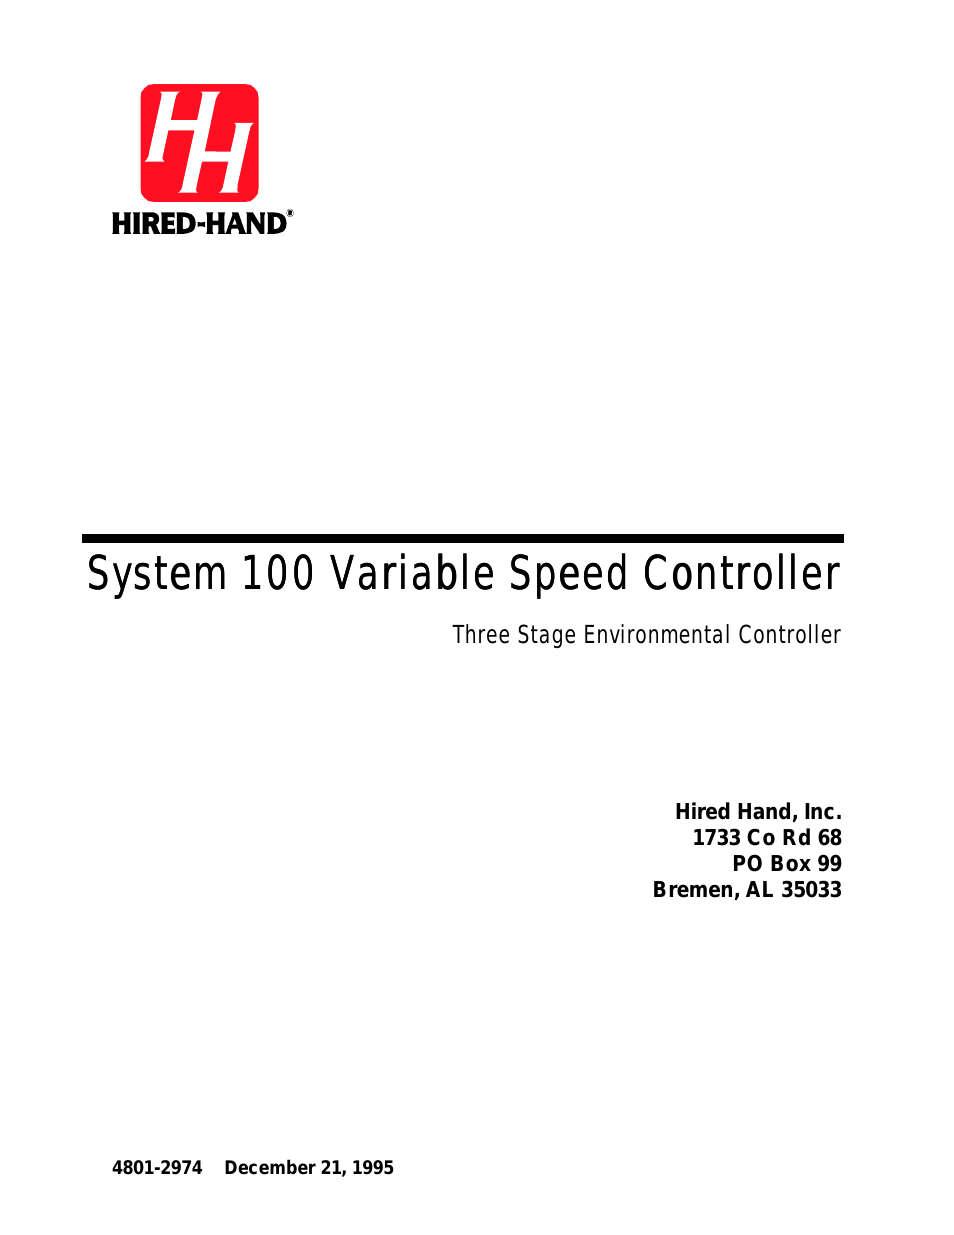 System 100 Variable Speed Controller